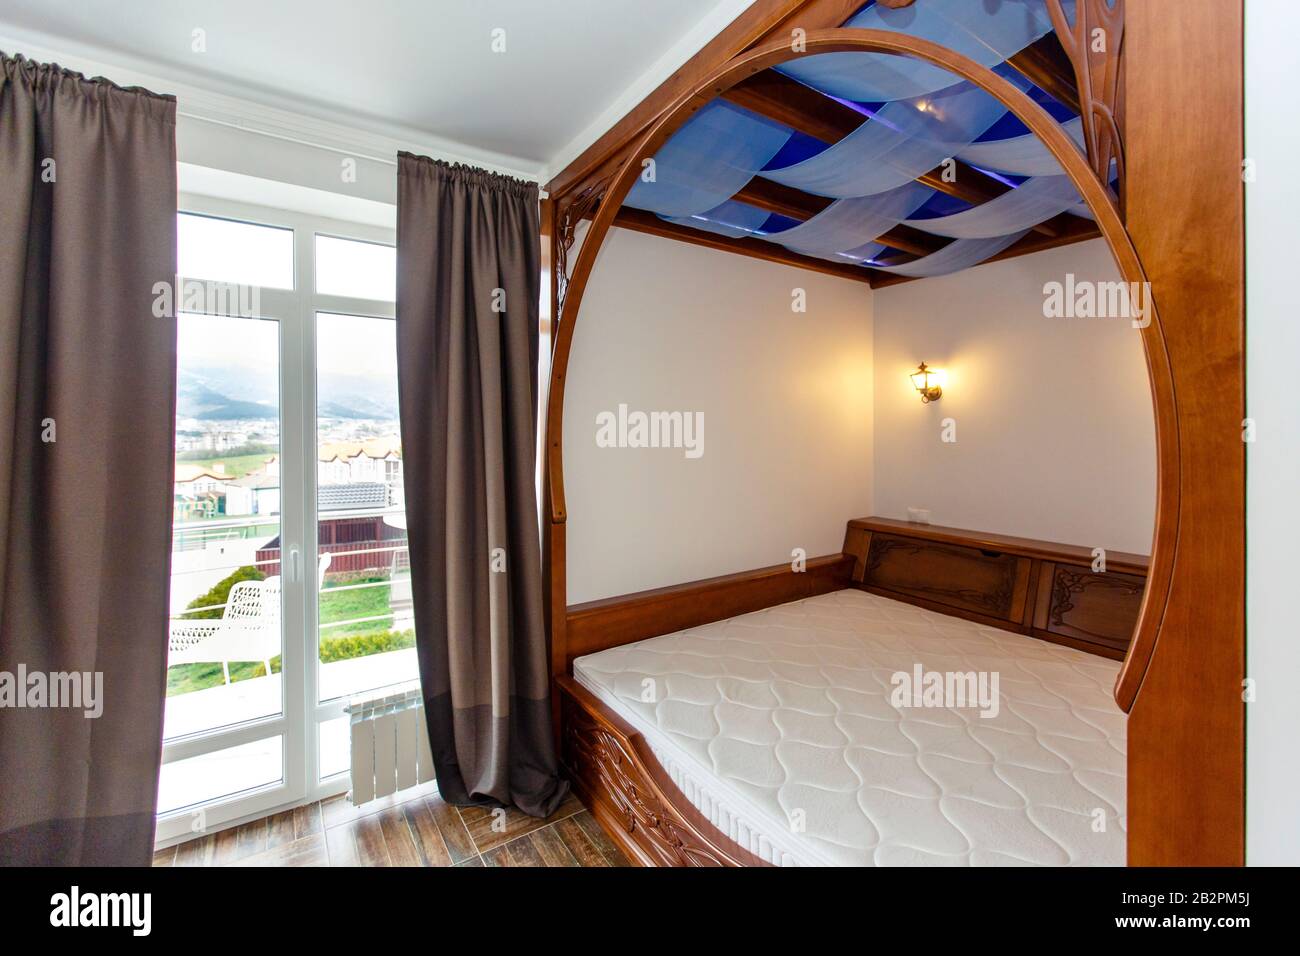 Bedroom In The Cottage With A Large Wooden Four Poster Bed The